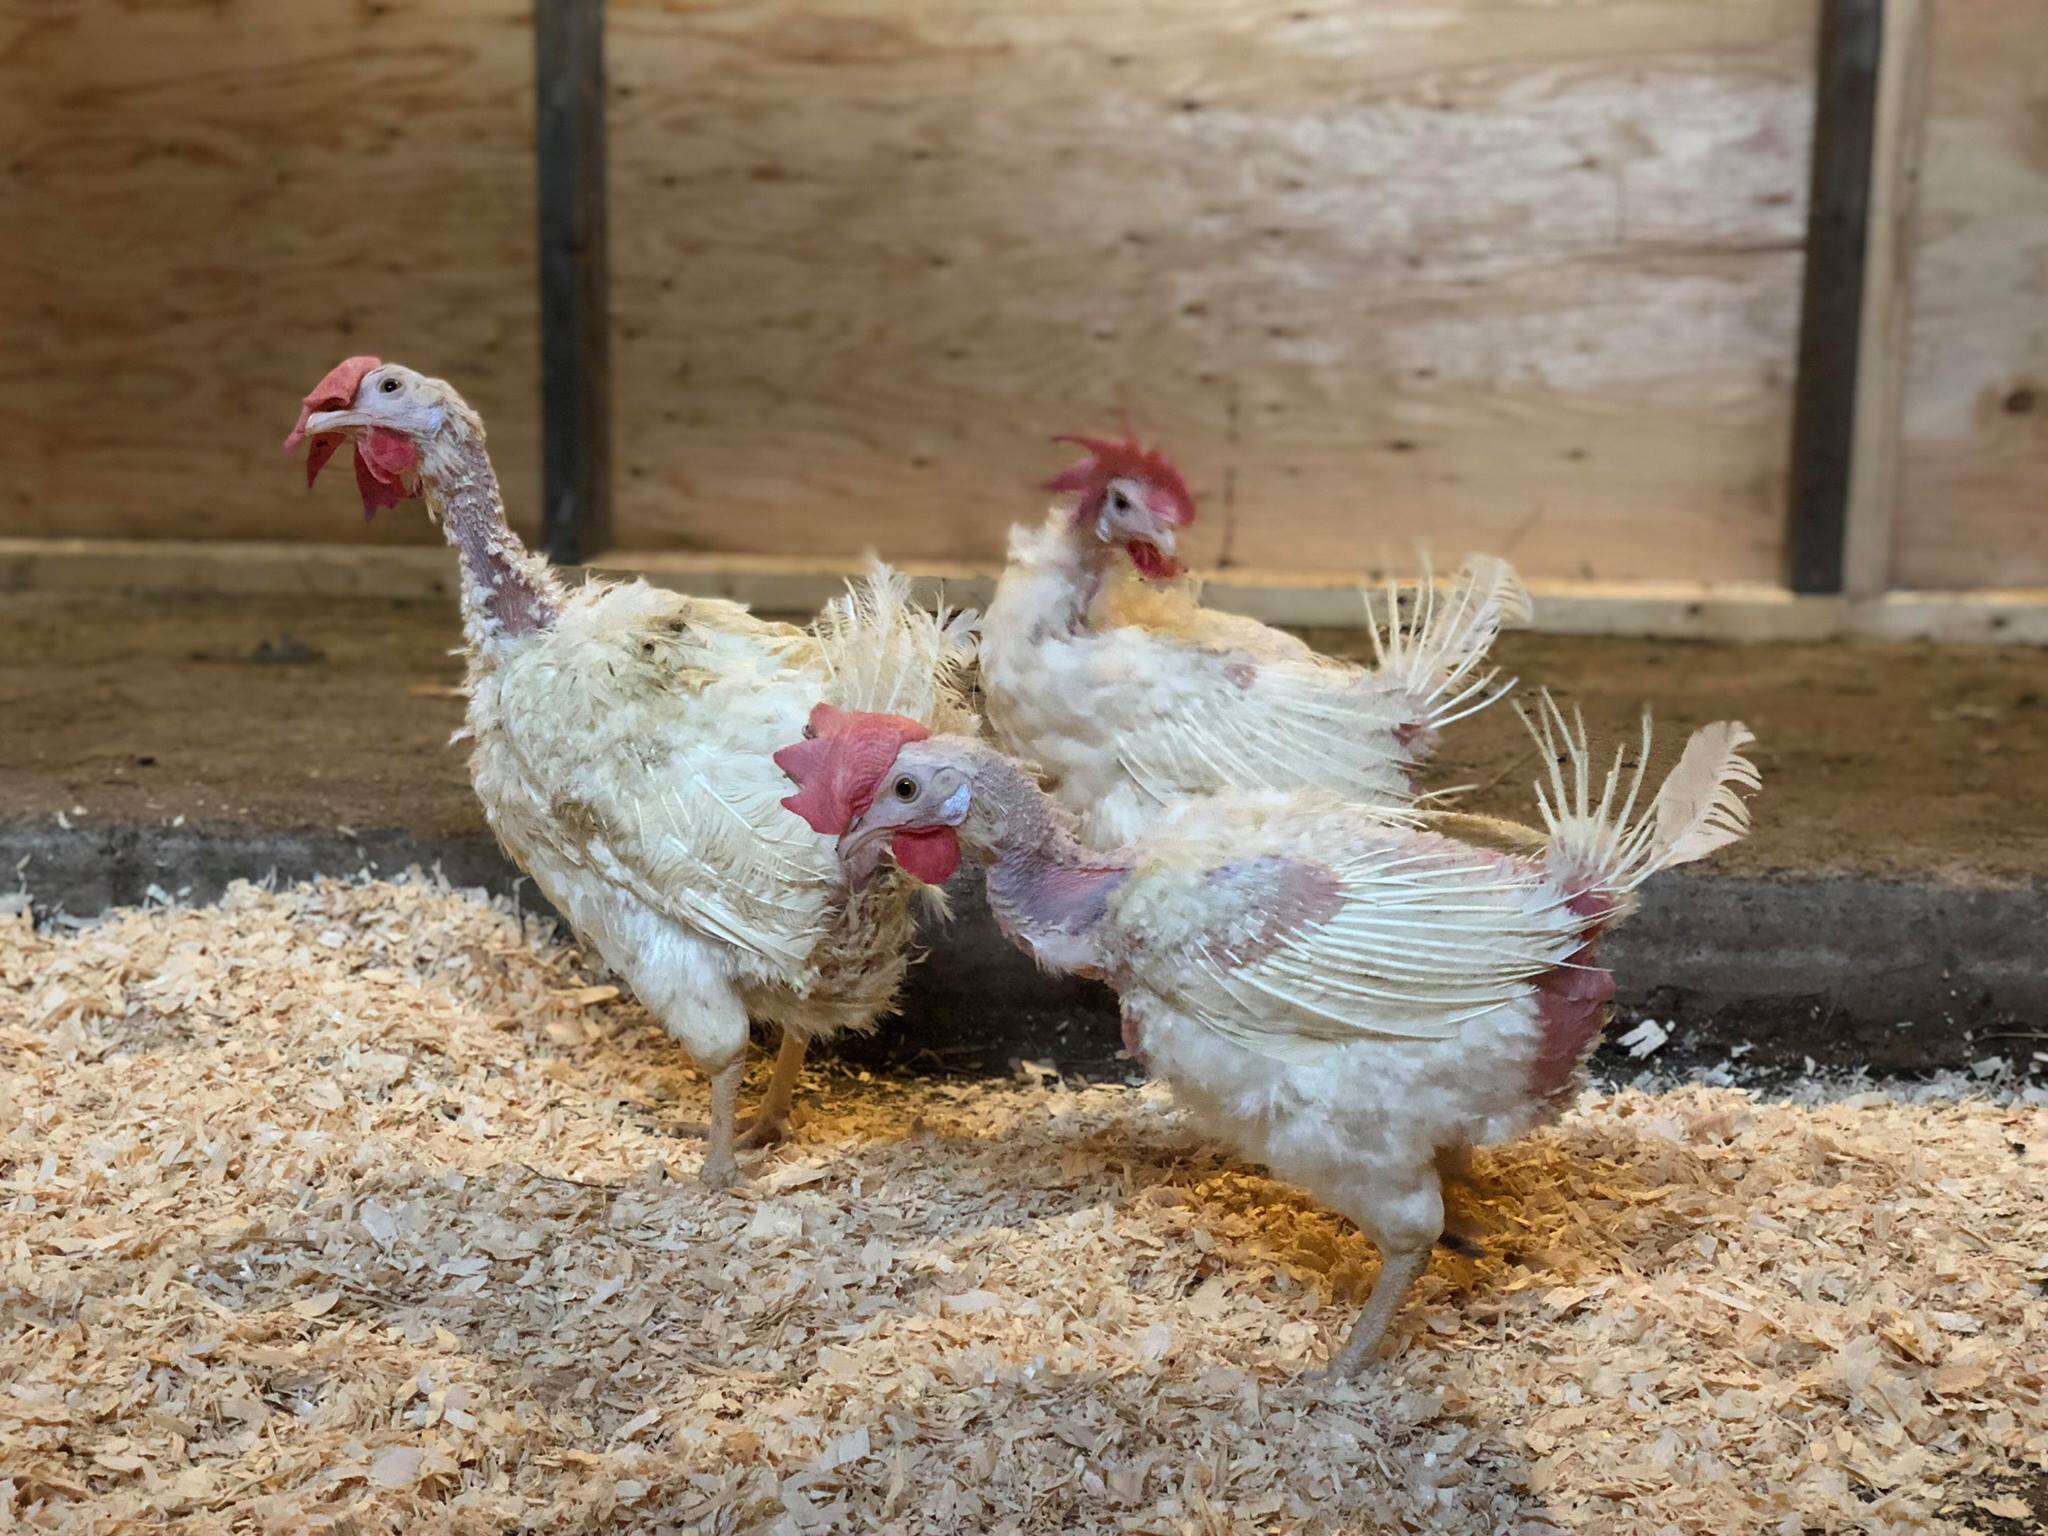 Rescued battery hens, "The Golden Girls," at sanctuary